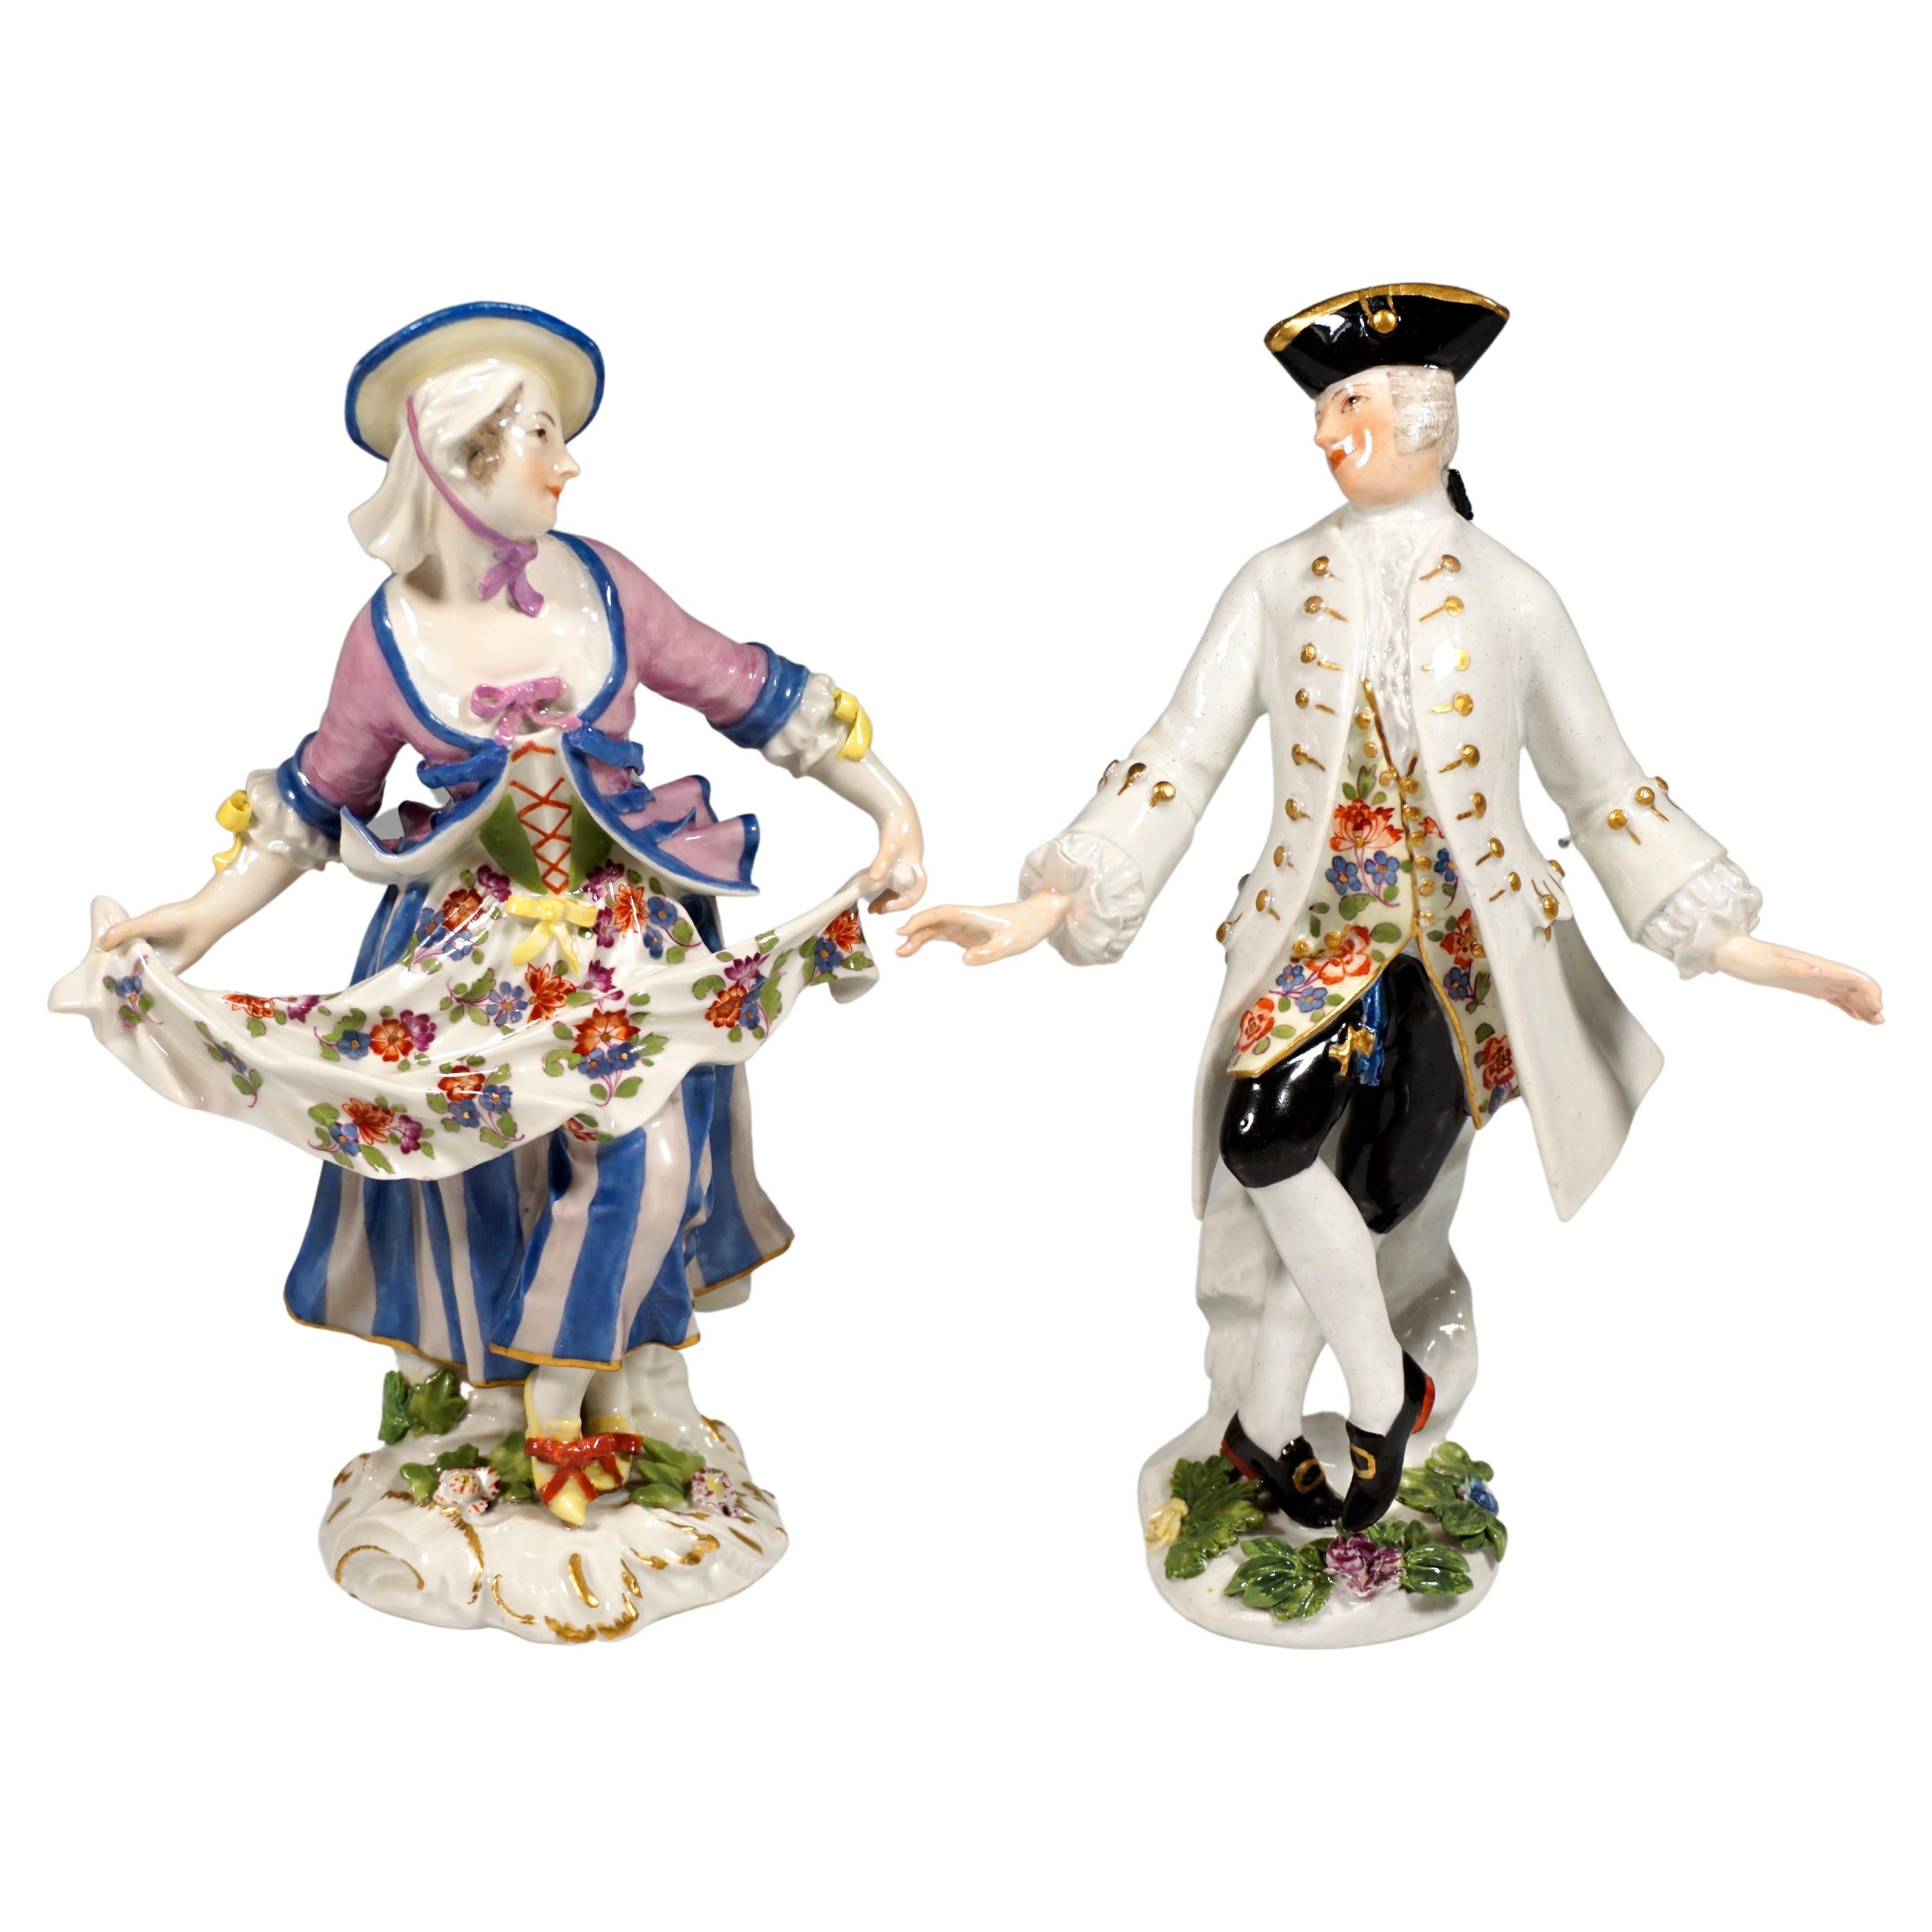 Pair of Very Early Meissen Figurines, Dance Couple, Germany, Around 1755